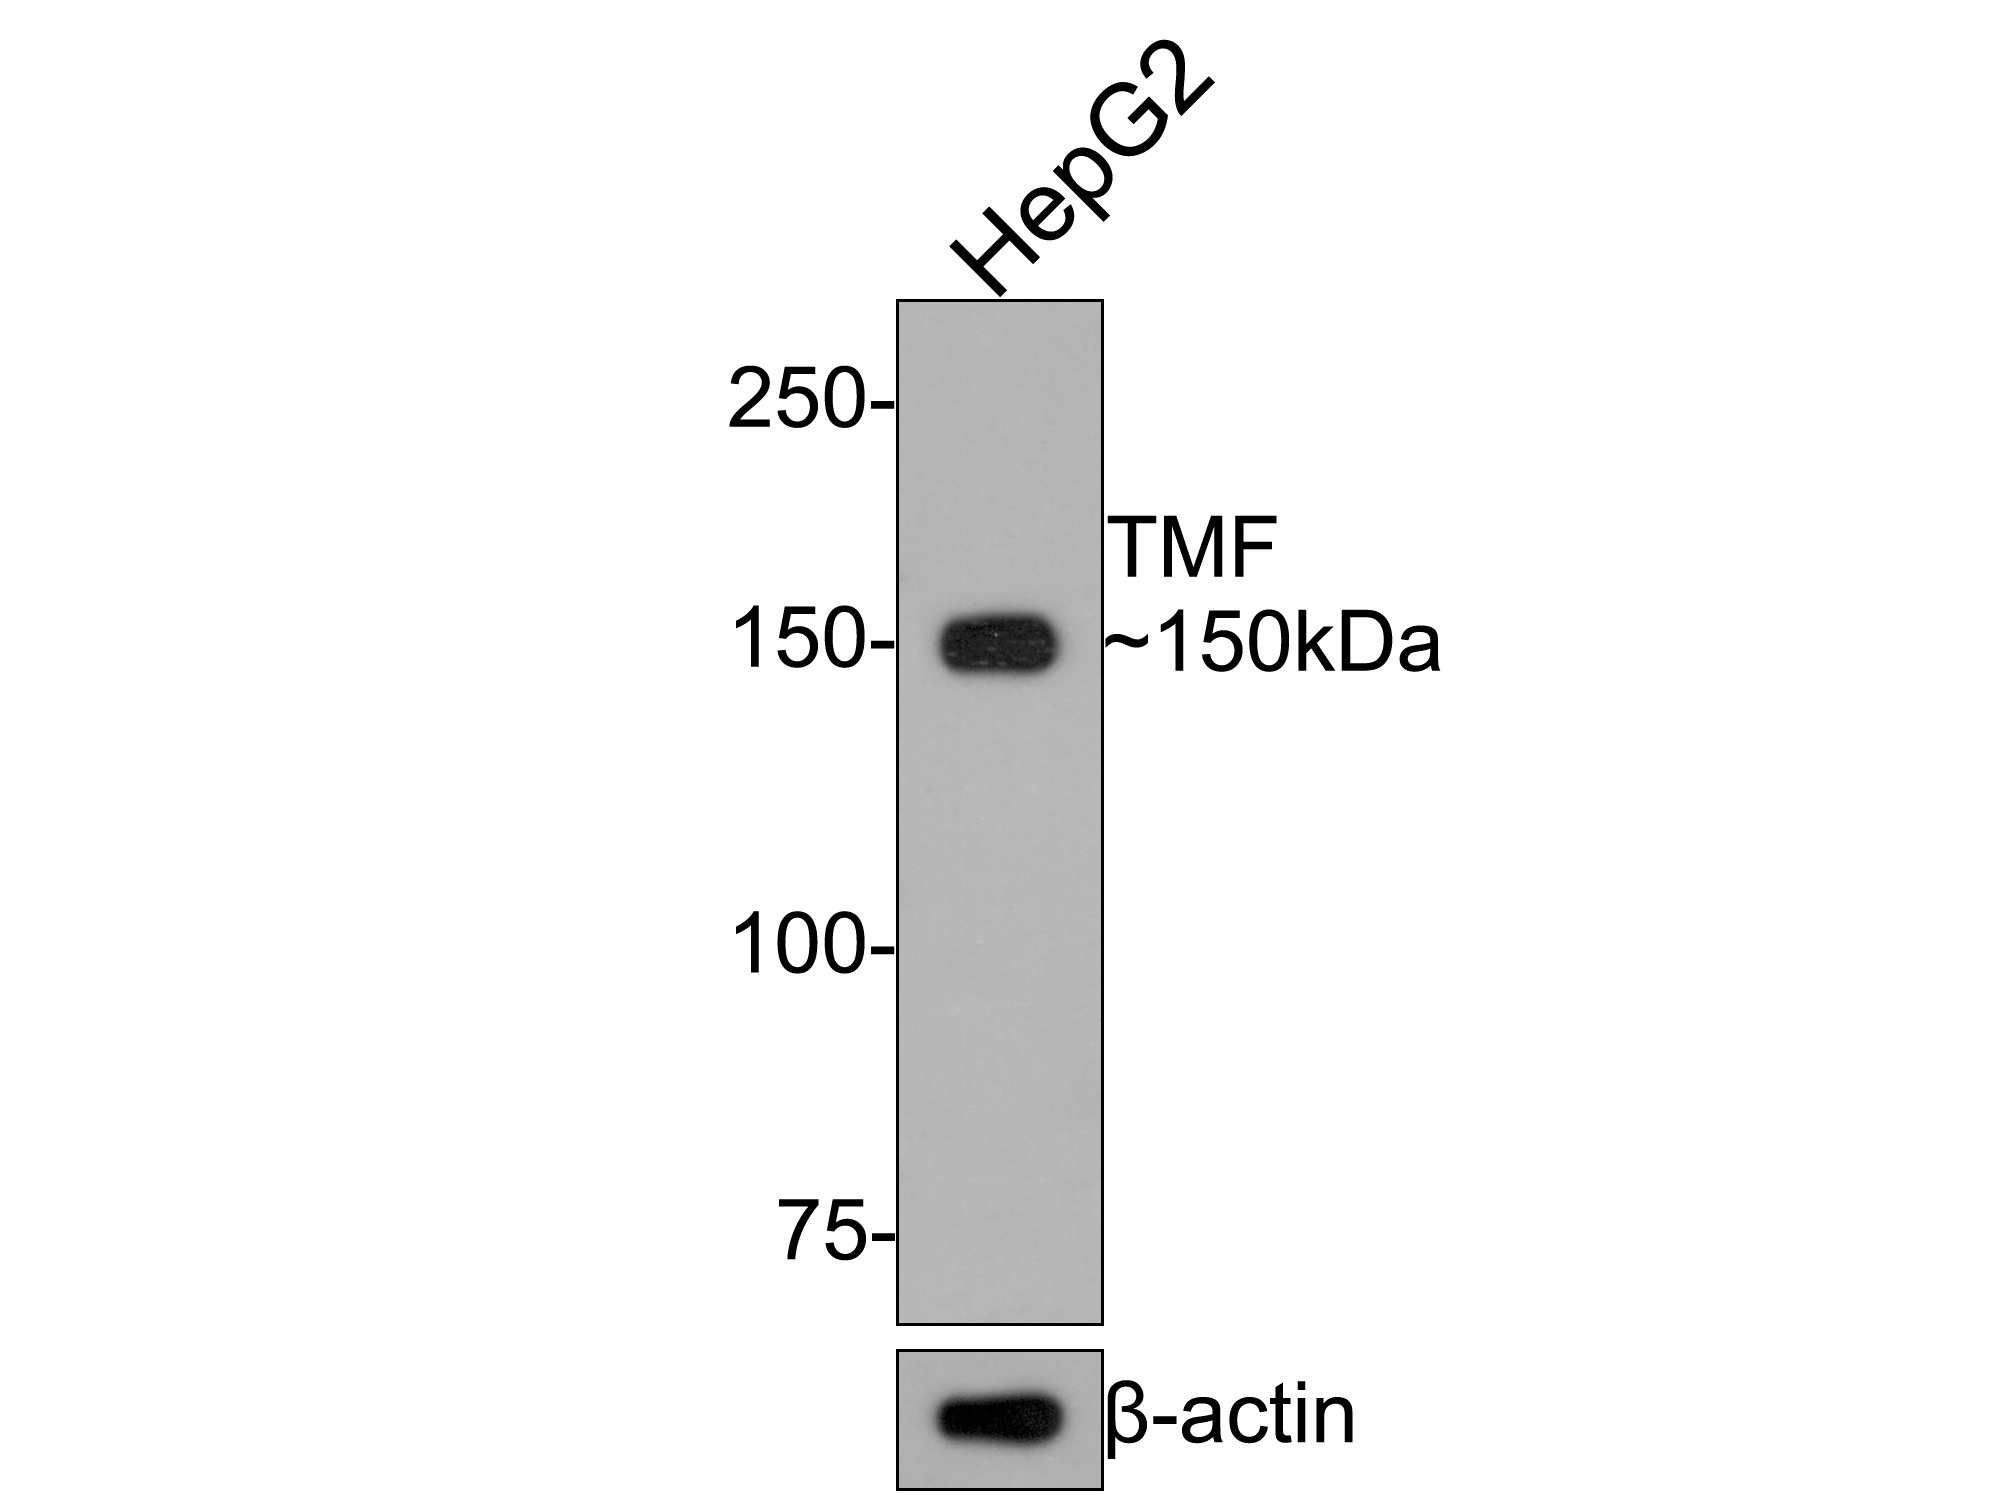 Western blot analysis of TMF on HepG2 cell lysates with Rabbit anti-TMF antibody (HA720089) at 1/1,000 dilution.<br />
<br />
Lysates/proteins at 10 µg/Lane.<br />
<br />
Predicted band size: 123 kDa<br />
Observed band size: 150 kDa<br />
<br />
Exposure time: 2 minutes;<br />
<br />
6% SDS-PAGE gel.<br />
<br />
Proteins were transferred to a PVDF membrane and blocked with 5% NFDM/TBST for 1 hour at room temperature. The primary antibody (HA720089) at 1/1,000 dilution was used in 5% NFDM/TBST at room temperature for 2 hours. Goat Anti-Rabbit IgG - HRP Secondary Antibody (HA1001) at 1:200,000 dilution was used for 1 hour at room temperature.